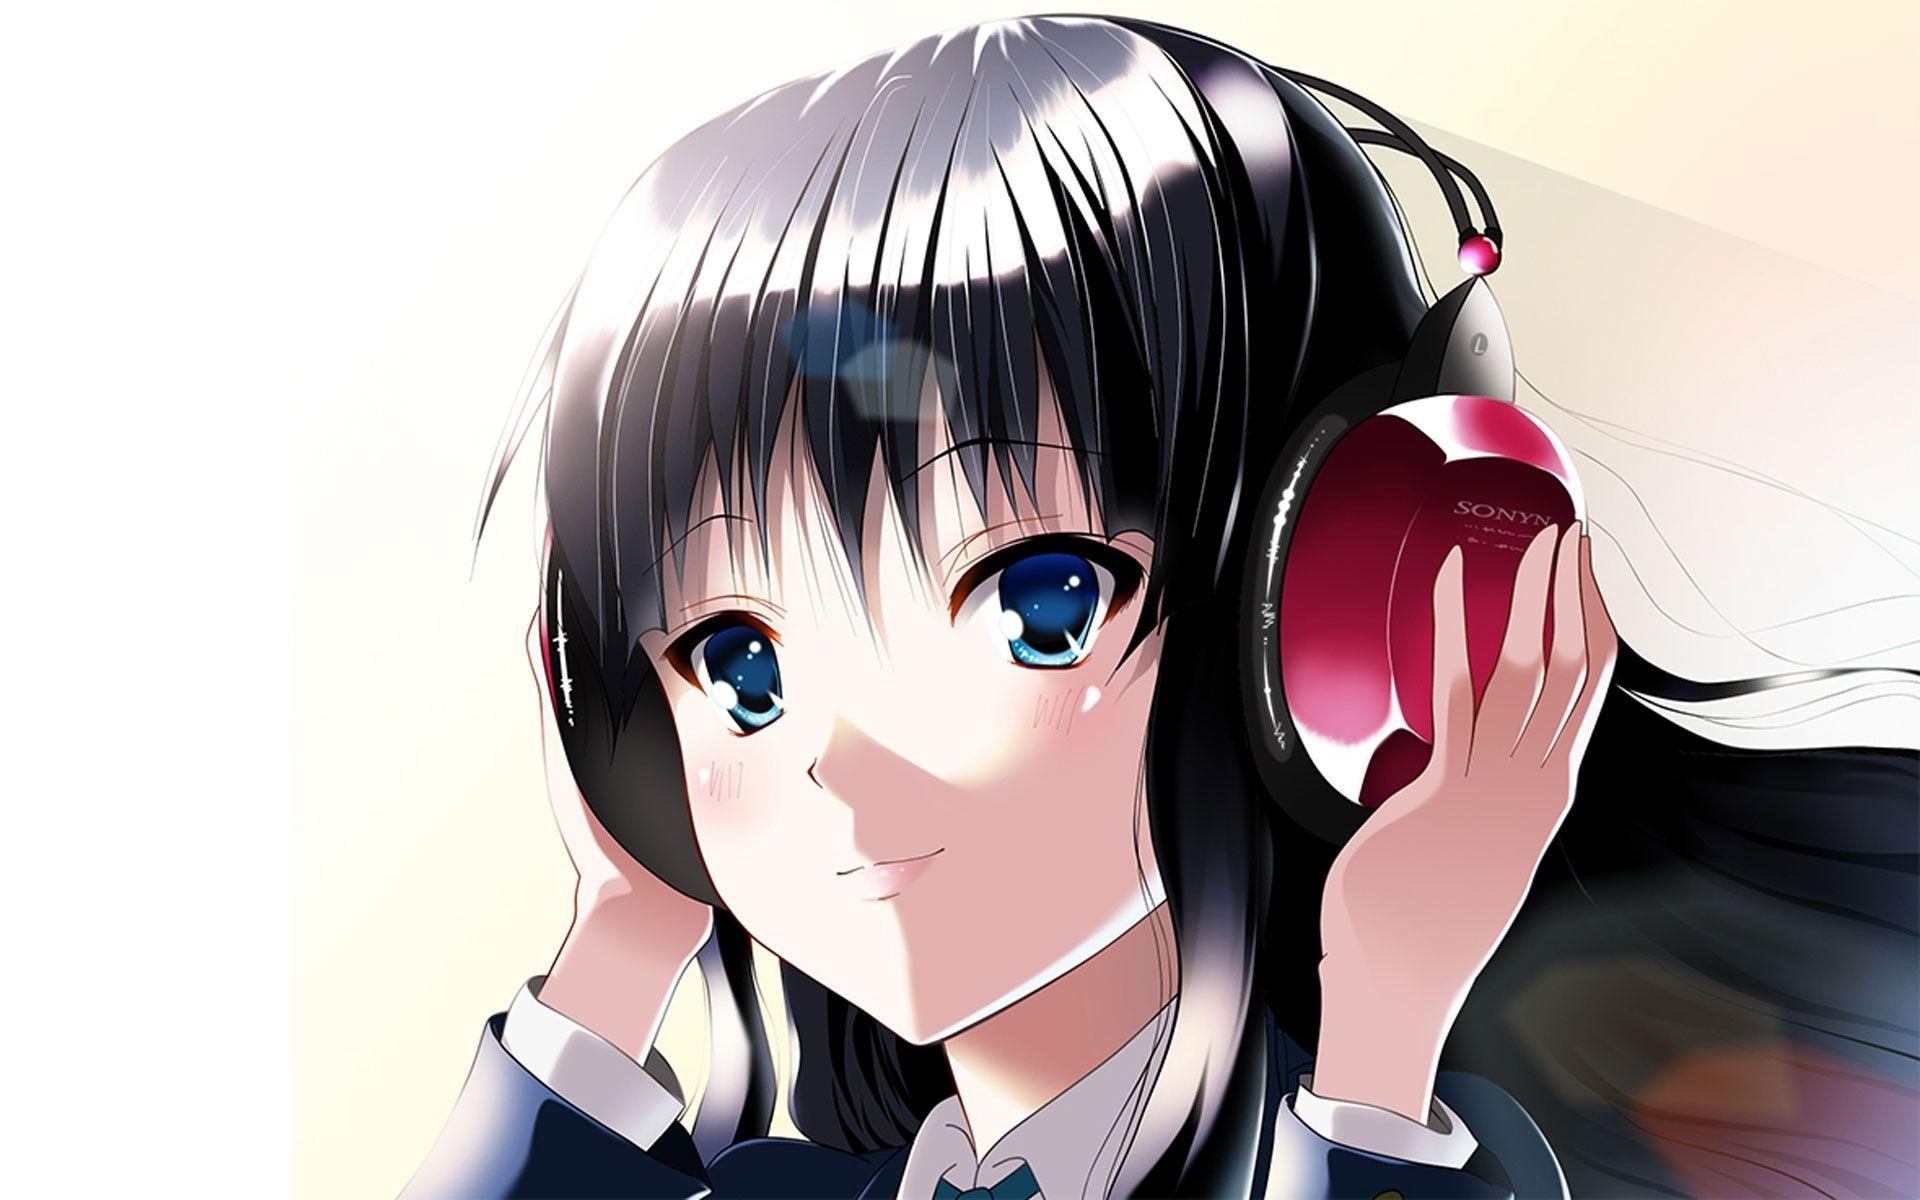 4. Anime girl with curly blue hair and headphones - wide 1